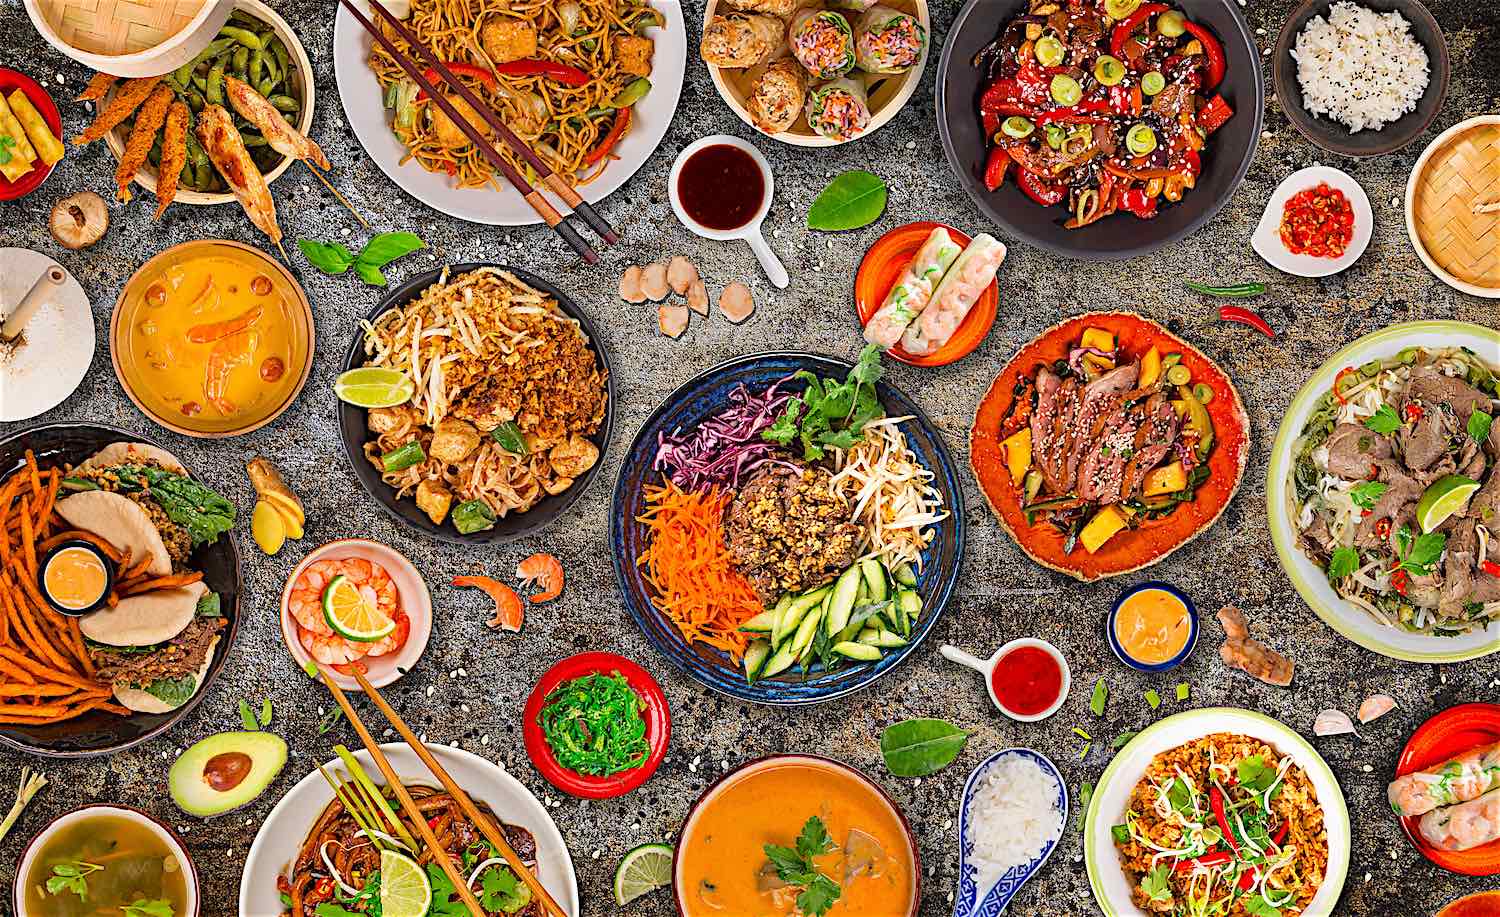 🥘 I Bet We Can Guess Your Age Based on the Food You’d Rather Eat Thai food cuisine